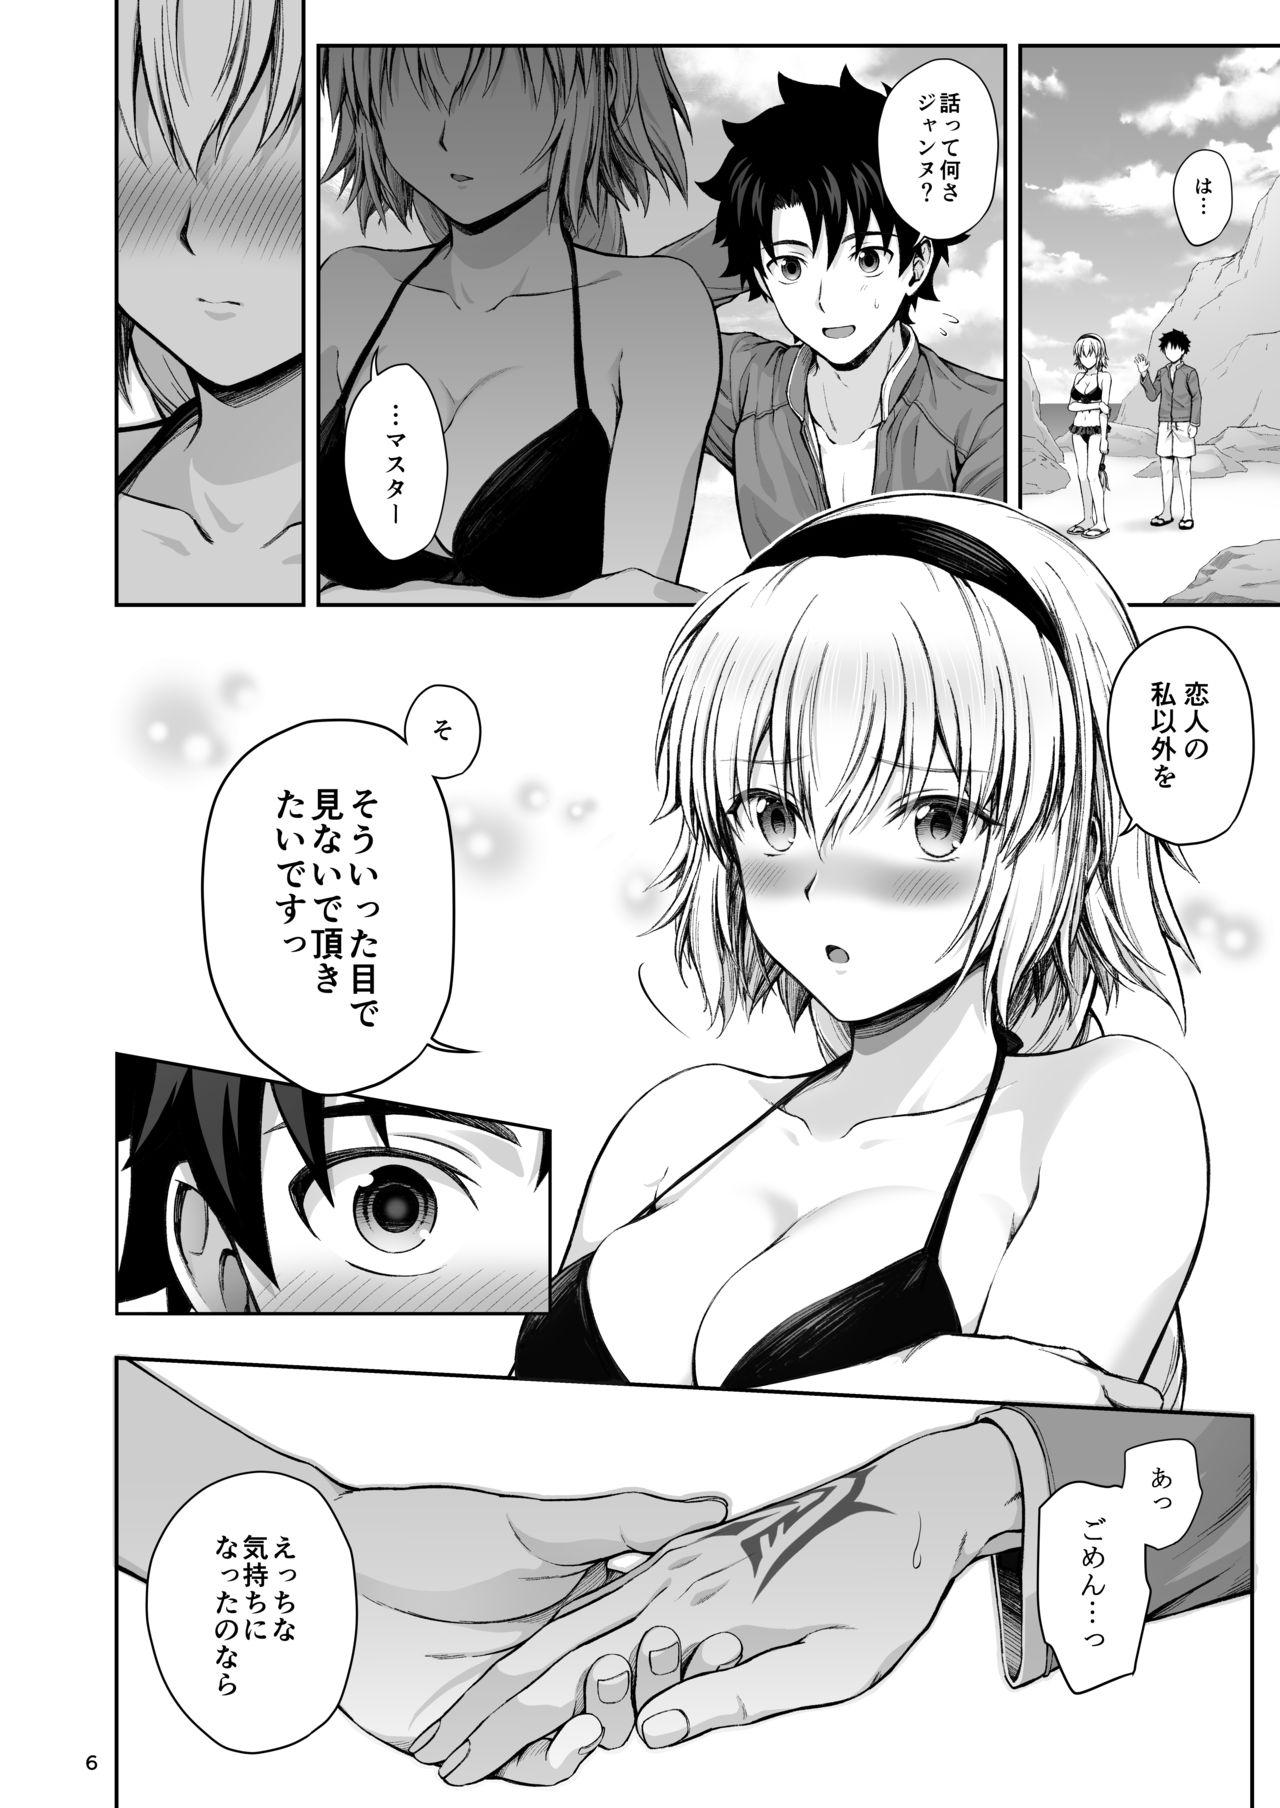 Tight Pussy Porn ジャンヌと夏の海 - Fate grand order Shavedpussy - Page 6